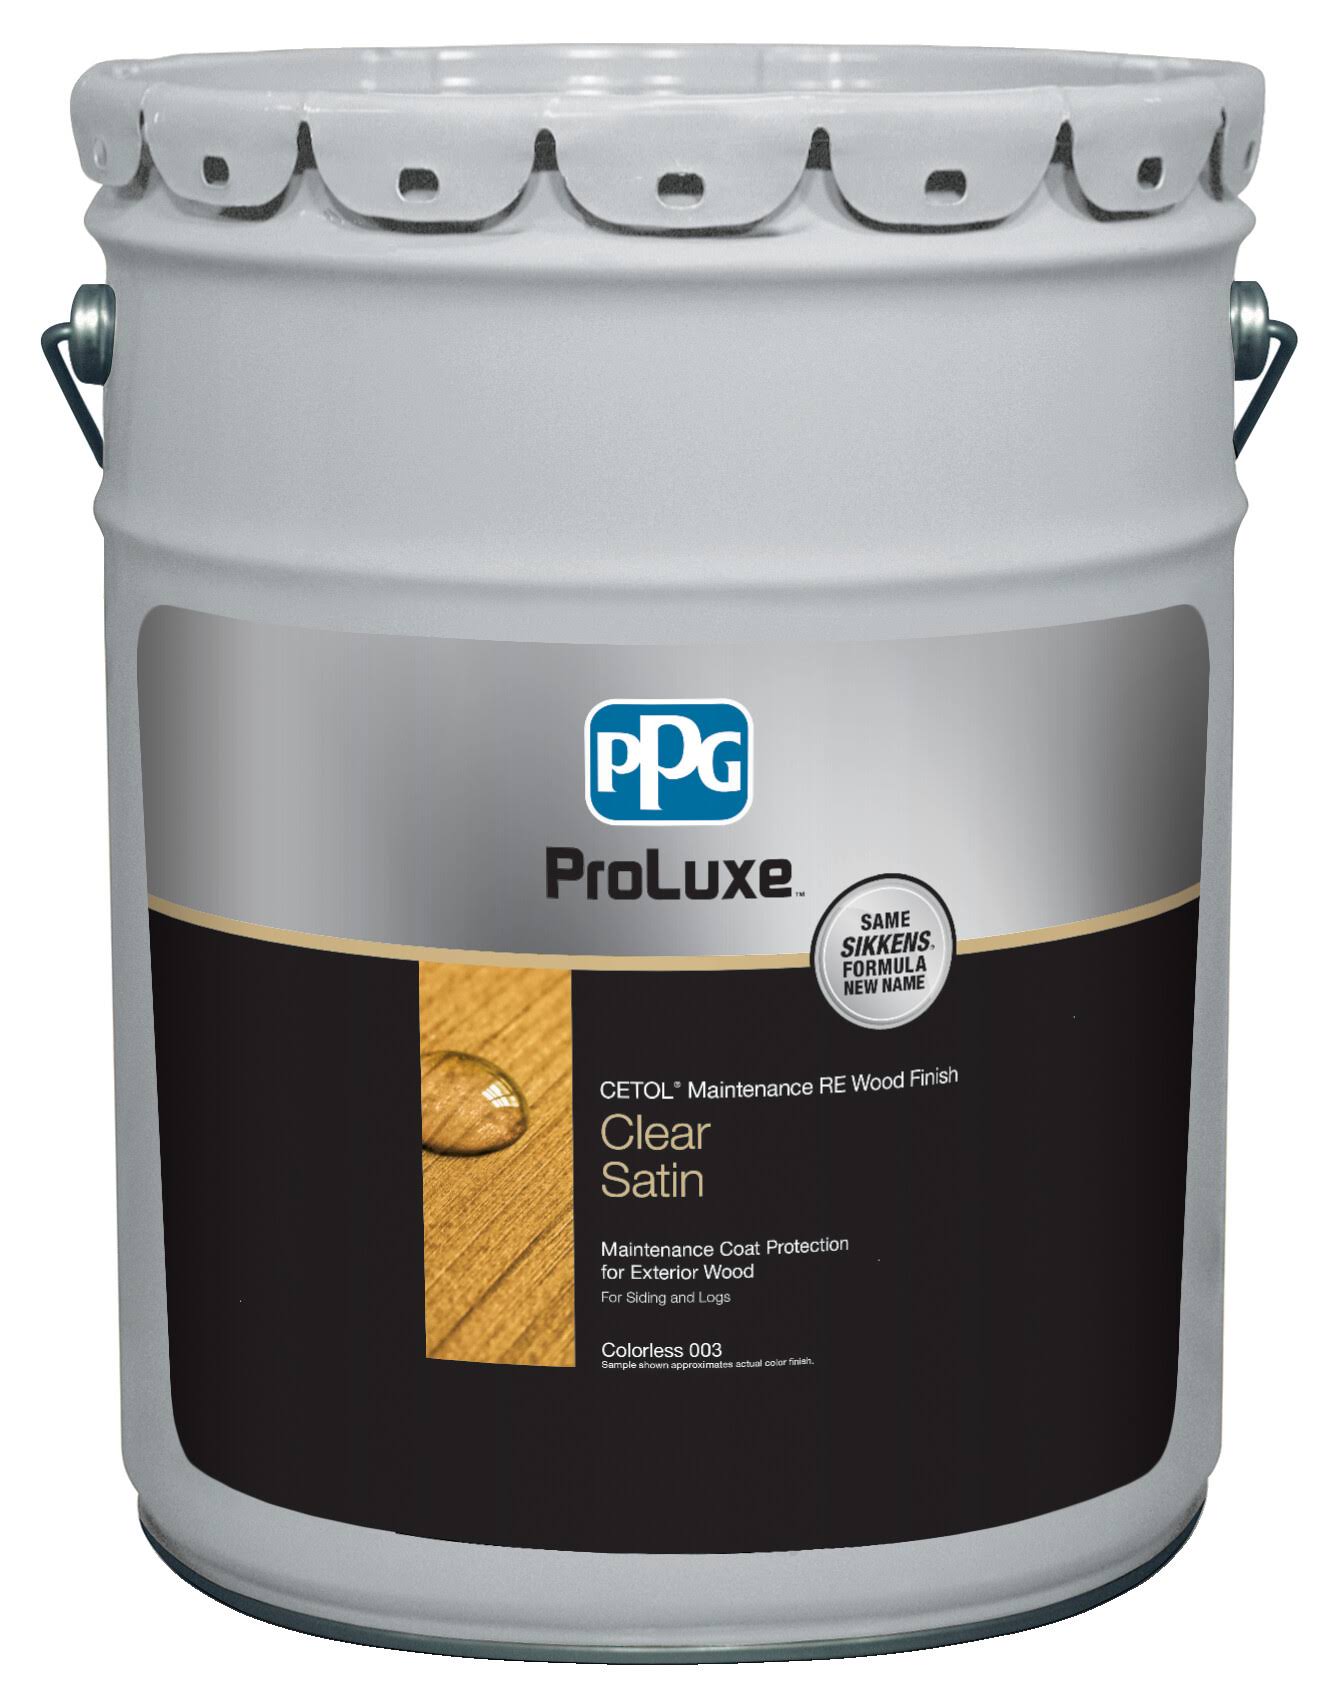 PPG Proluxe Cetol SIK61003/05 Wood Finish, Clear, Liquid, 5 gal, Pail